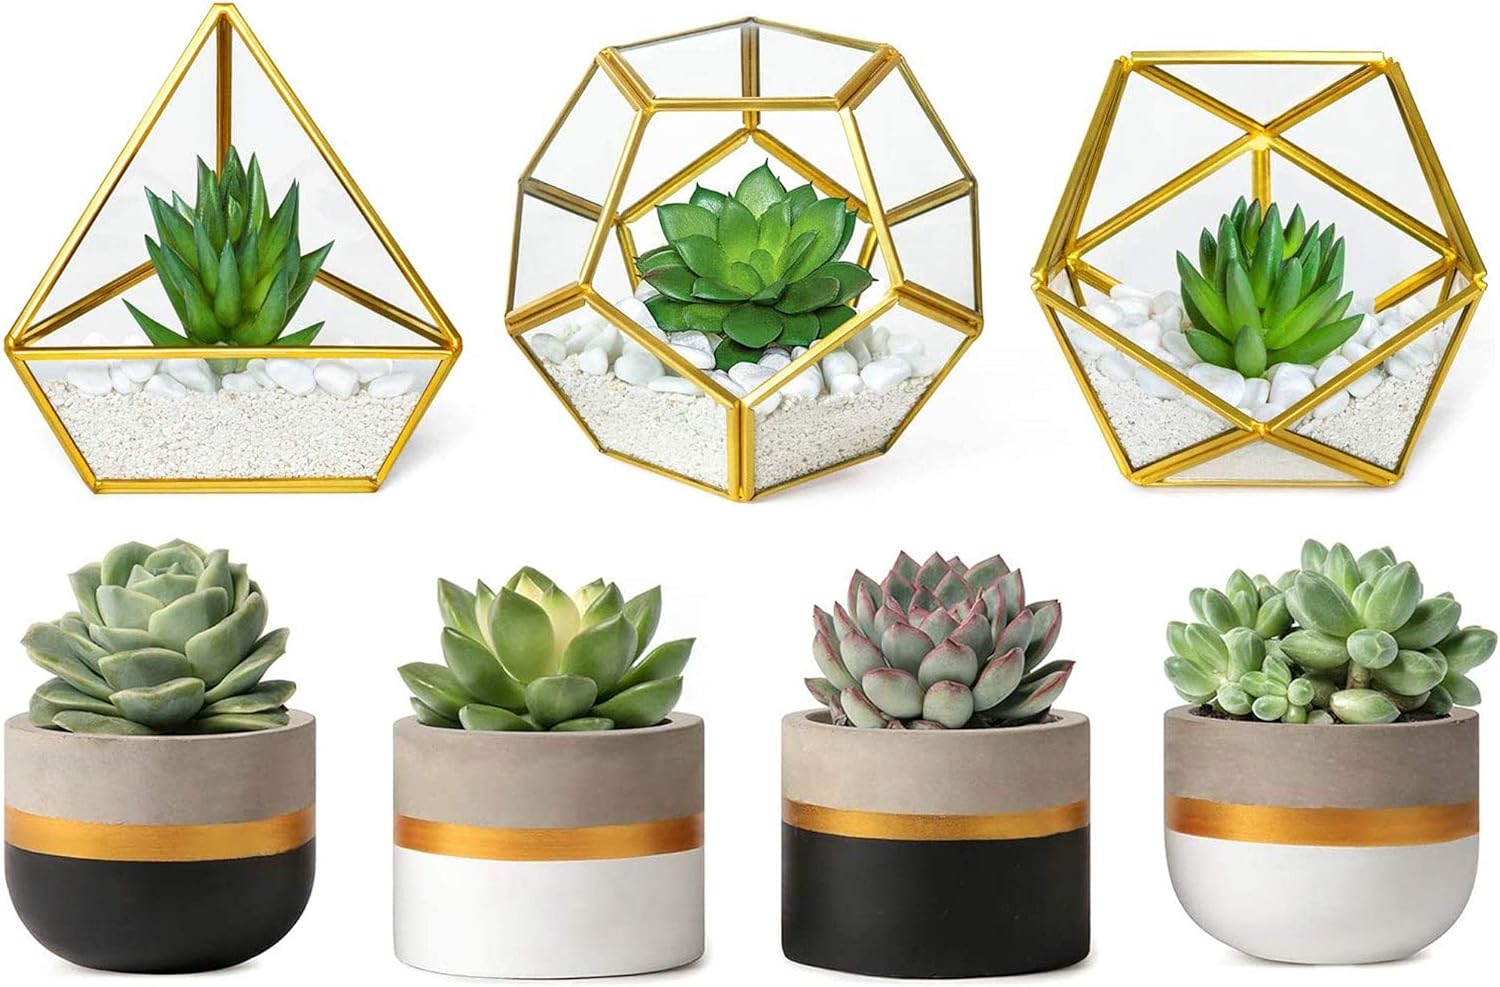 Mkono 3 Inch Mini Cement Succulent Planter Modern Tiny Concrete Cactus Plant Pots Small Clay Indoor Herb Window Box Container for Home Office Decor, Set of 4 (Plants NOT Included)